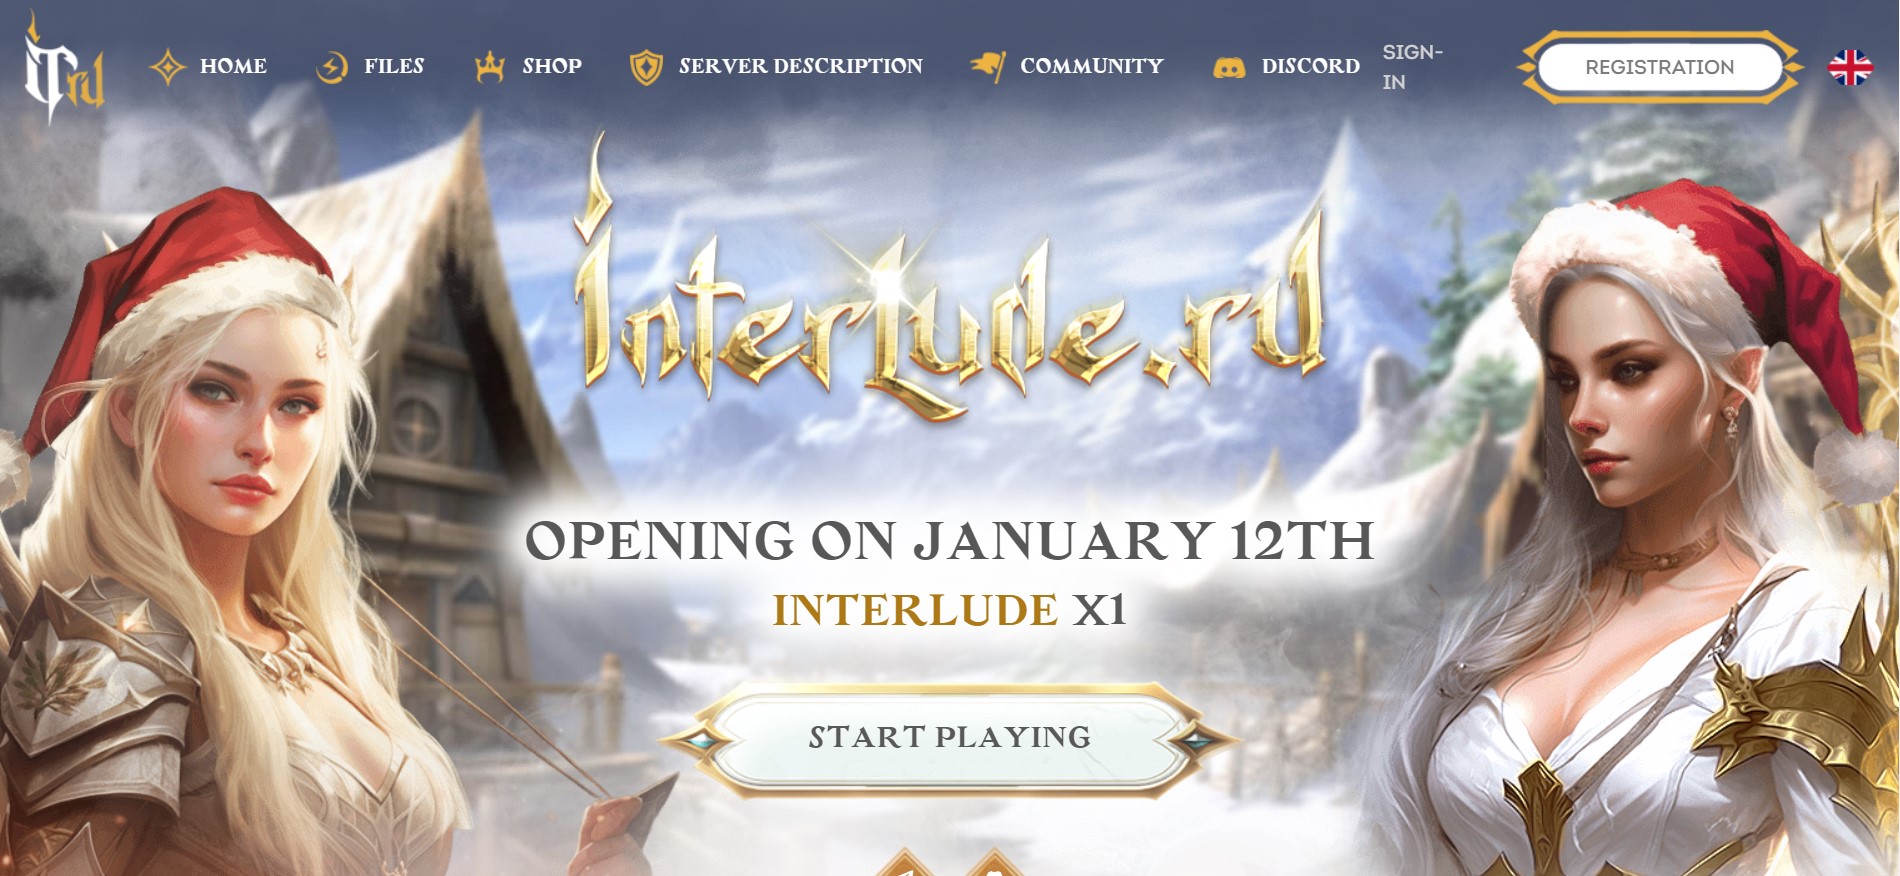 🏰 Interlude.ru: Embark on an epic adventure with x1 rates in the world of Lineage 2 Interlude! Your story begins at interlude.ru. ⚔️